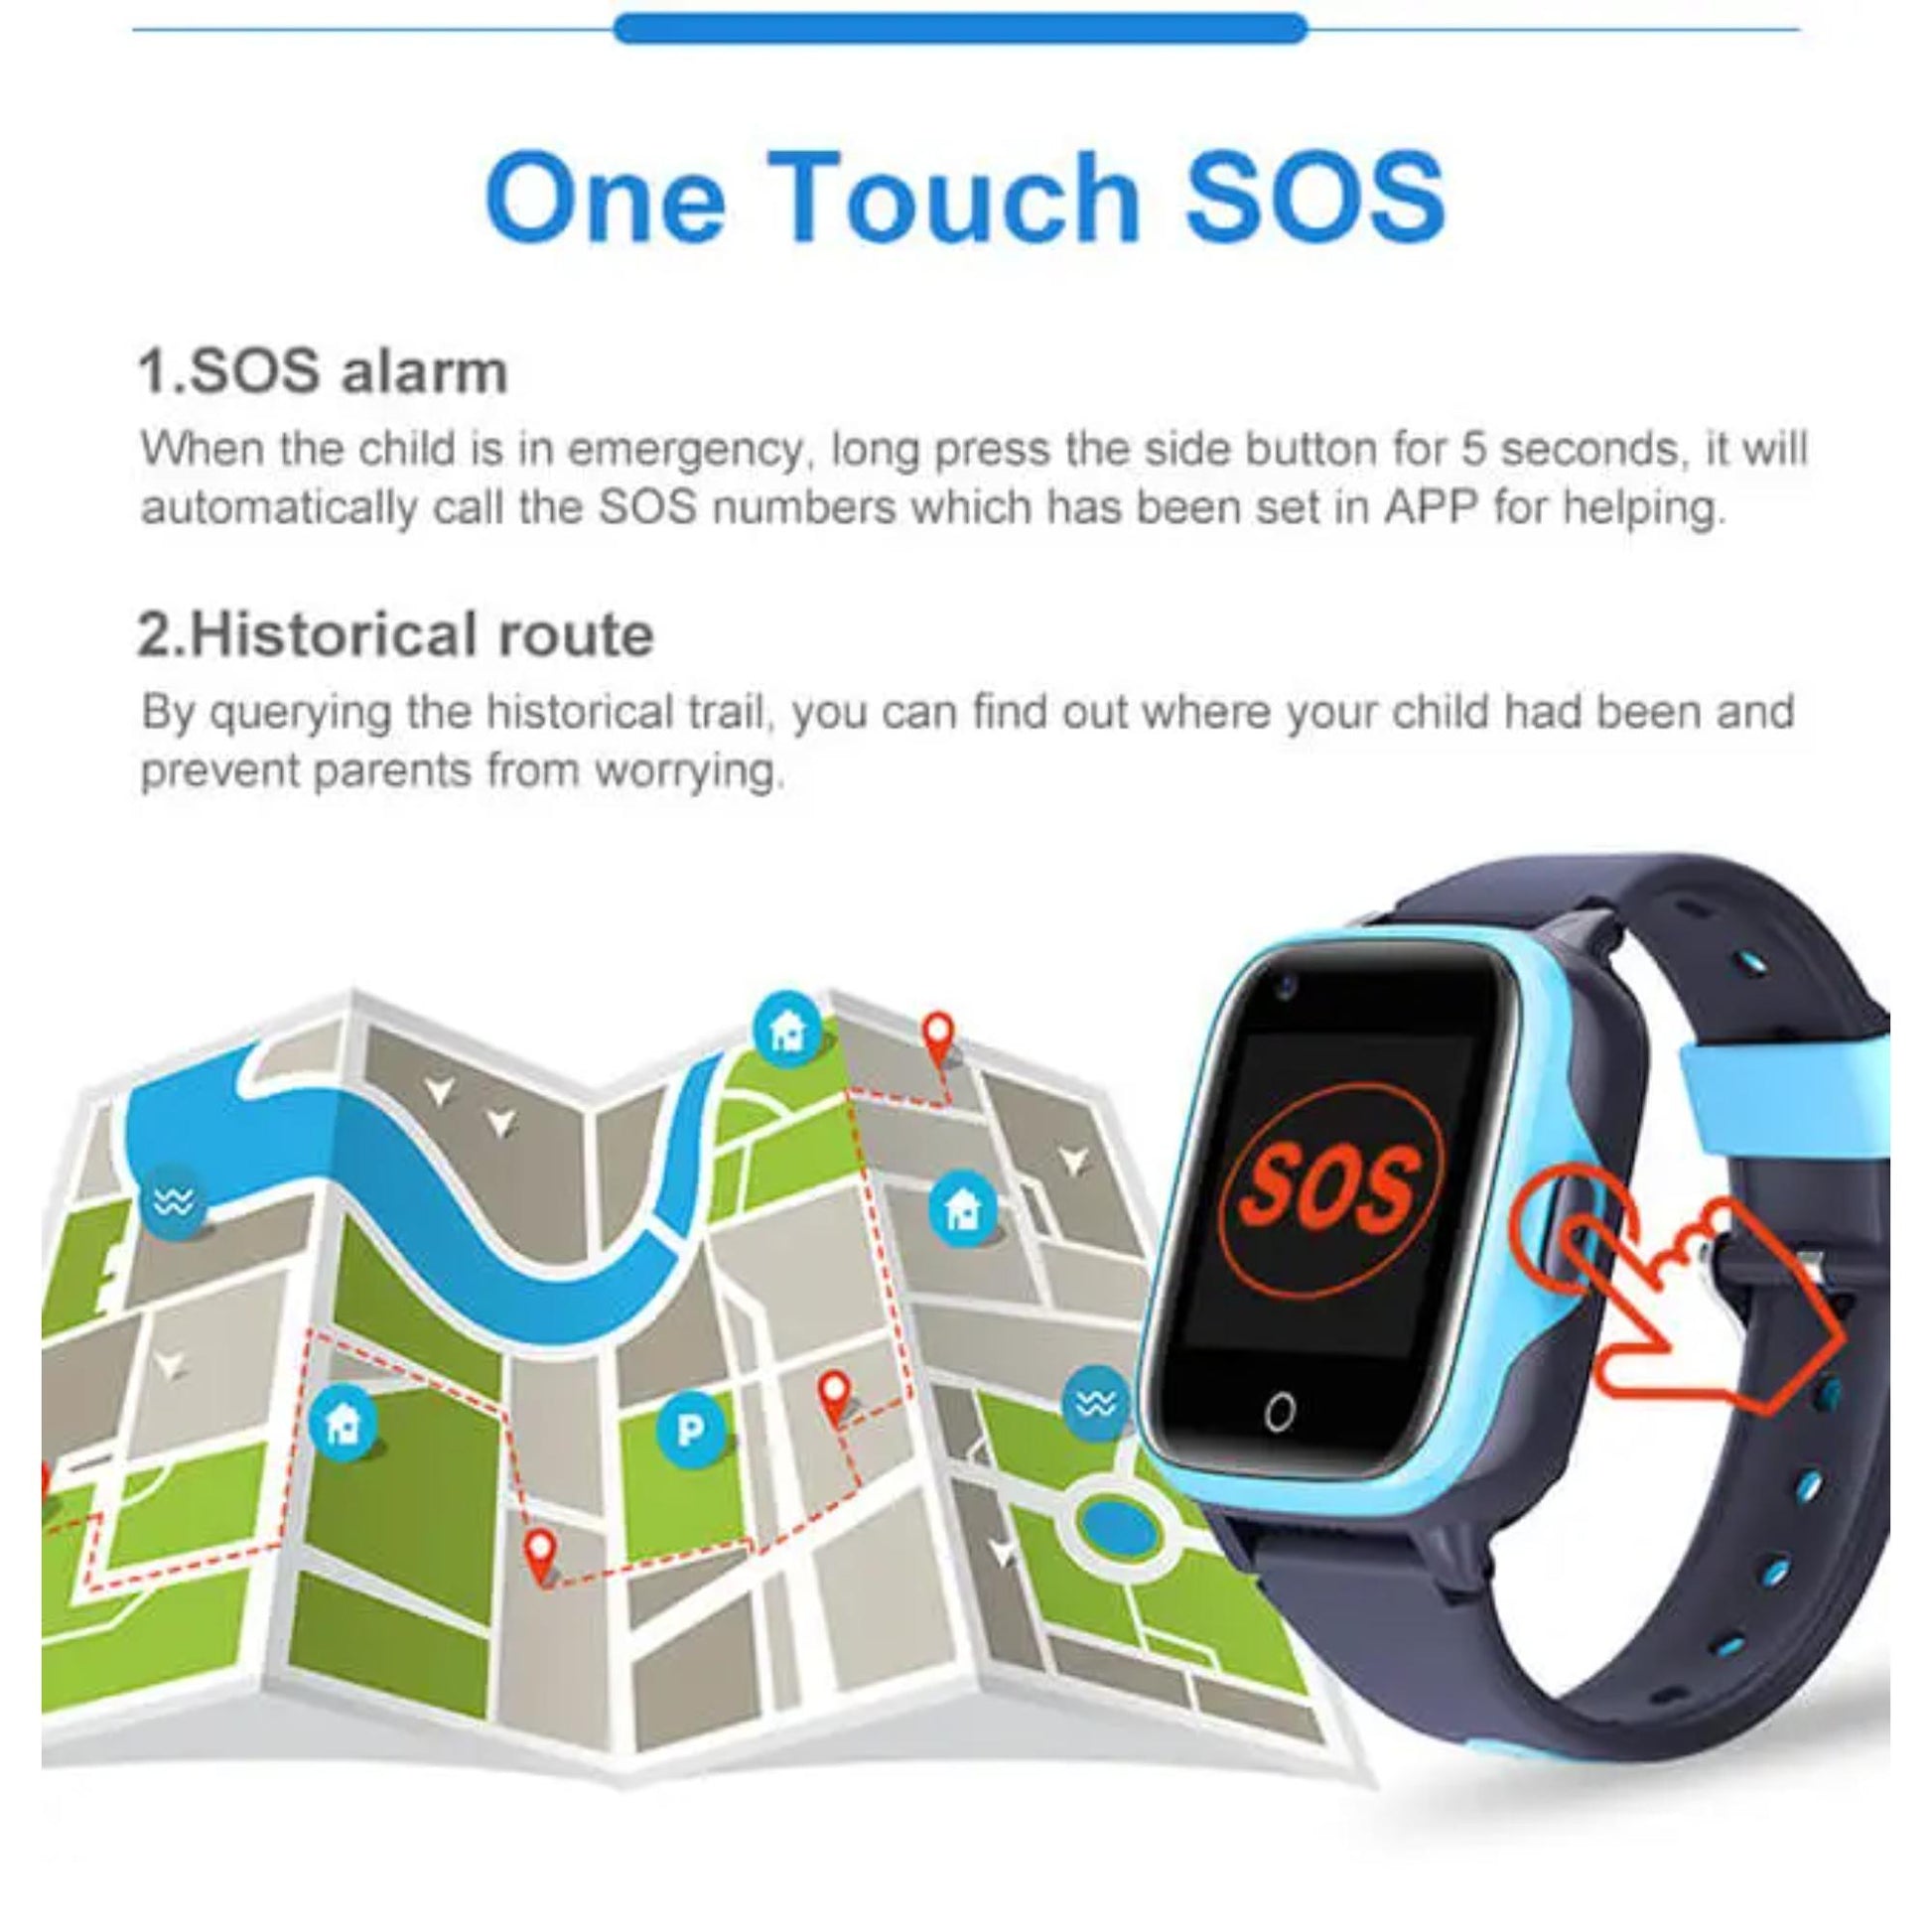 Valdus D31 Kids Smartwatch with 4G FDD Support, Real-Time GPS Tracker, SOS Feature, Voice & Video Messaging, 1.4-inch Display. | Blue Chilli Electronics.